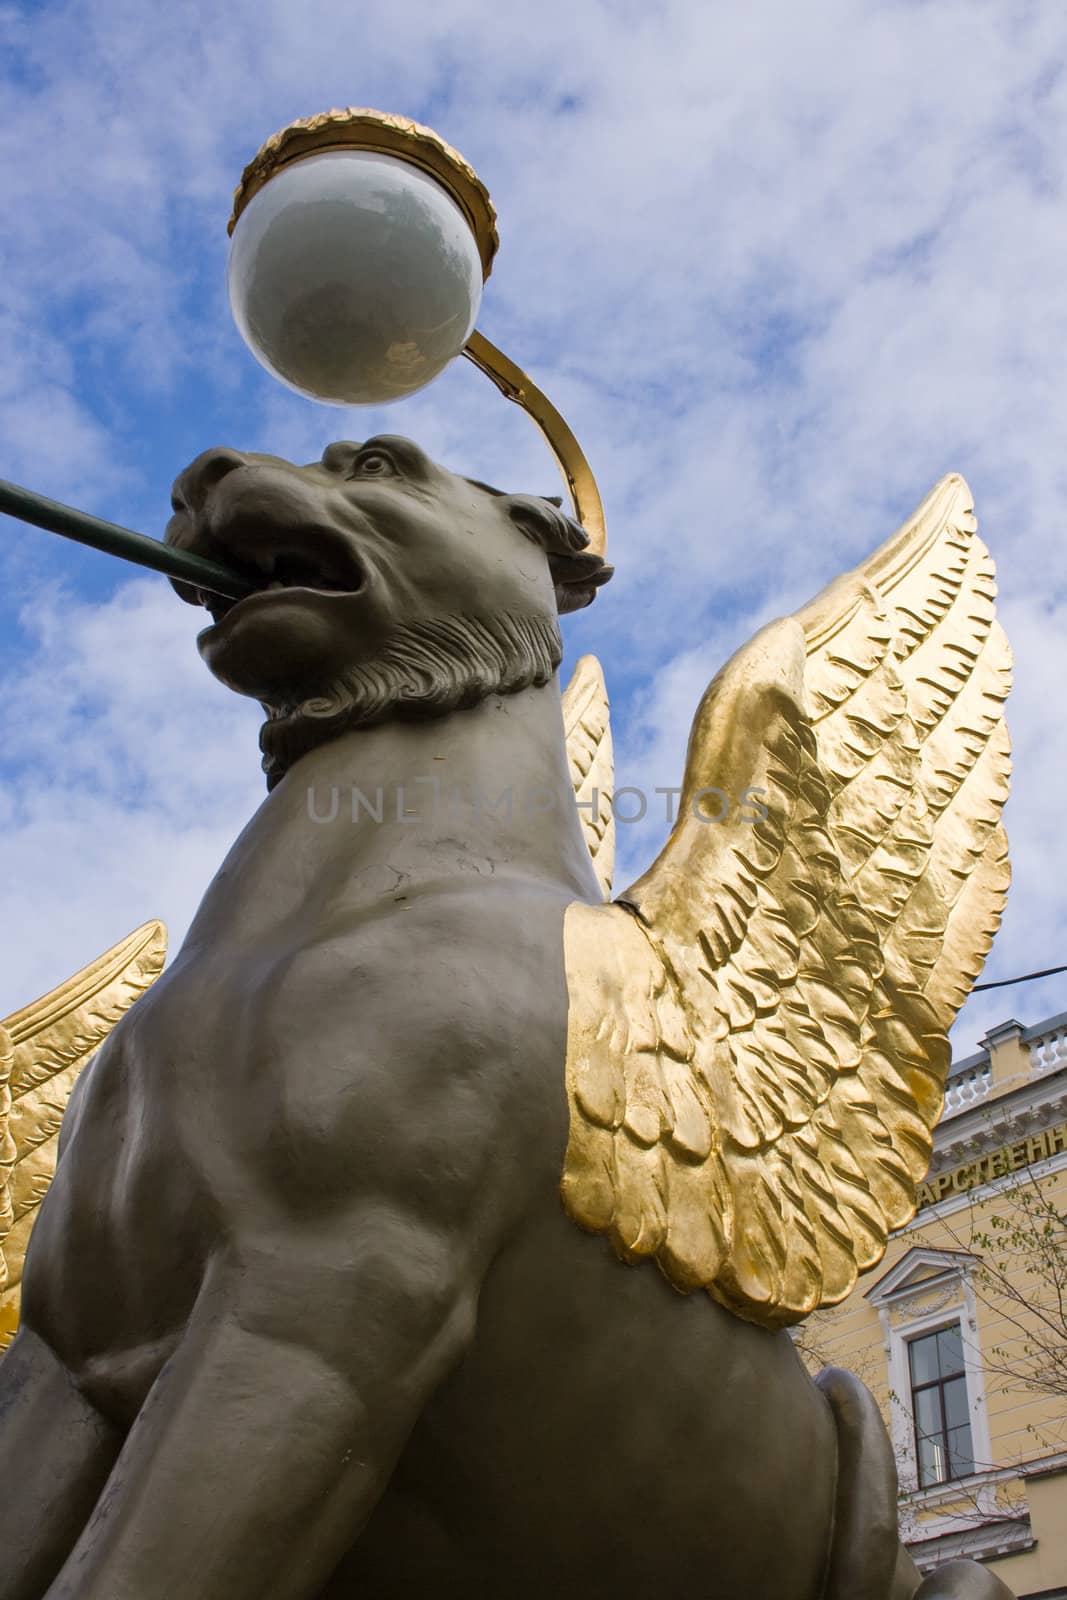 The famous winged lions on the bridge of czarist era in St. Petersburg. Russia.